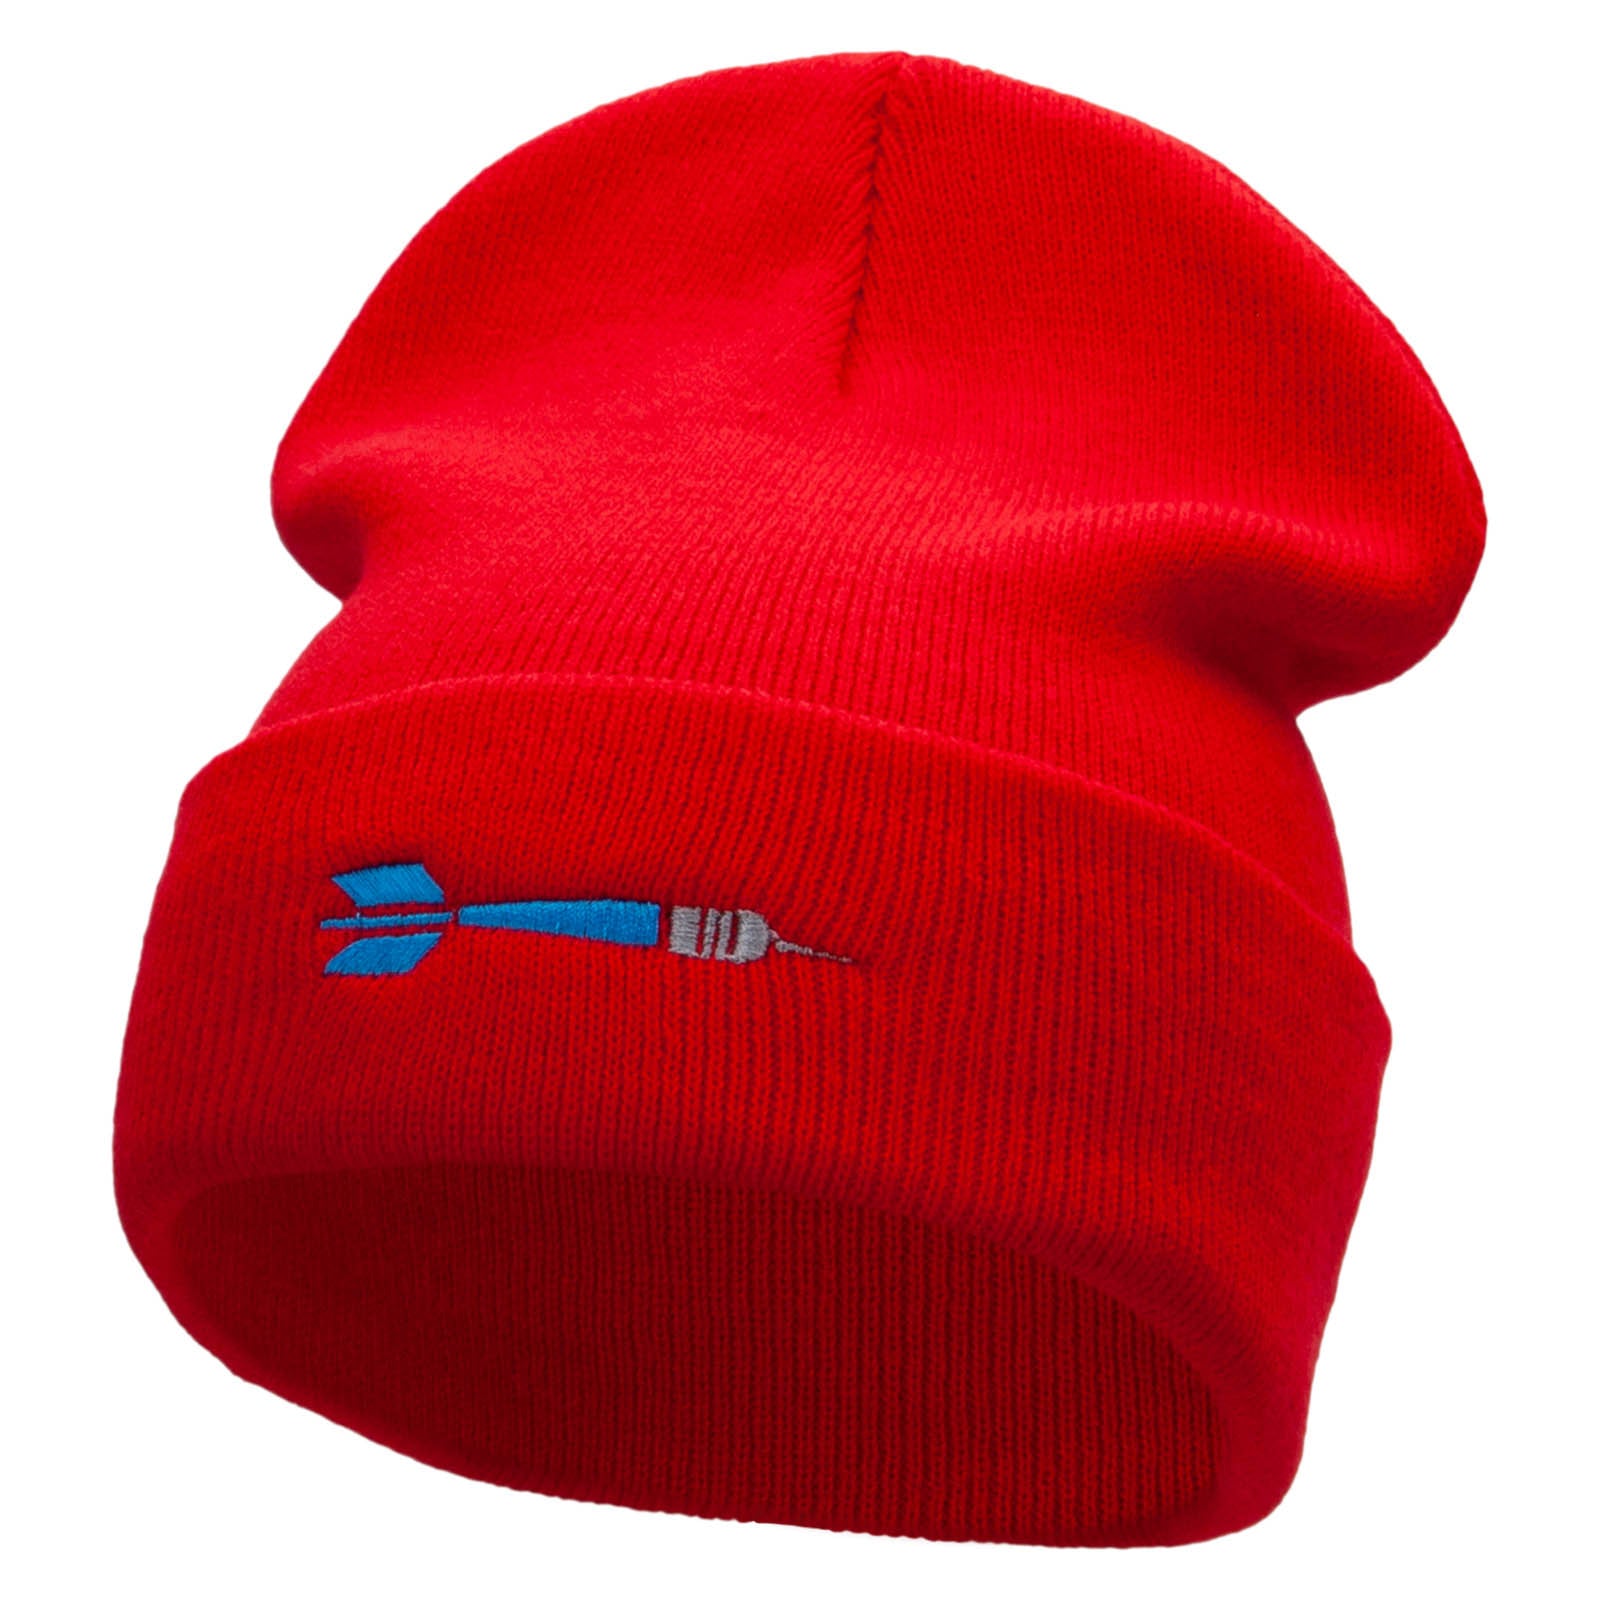 The Throwing Dart Embroidered 12 Inch Long Knitted Beanie - Red OSFM